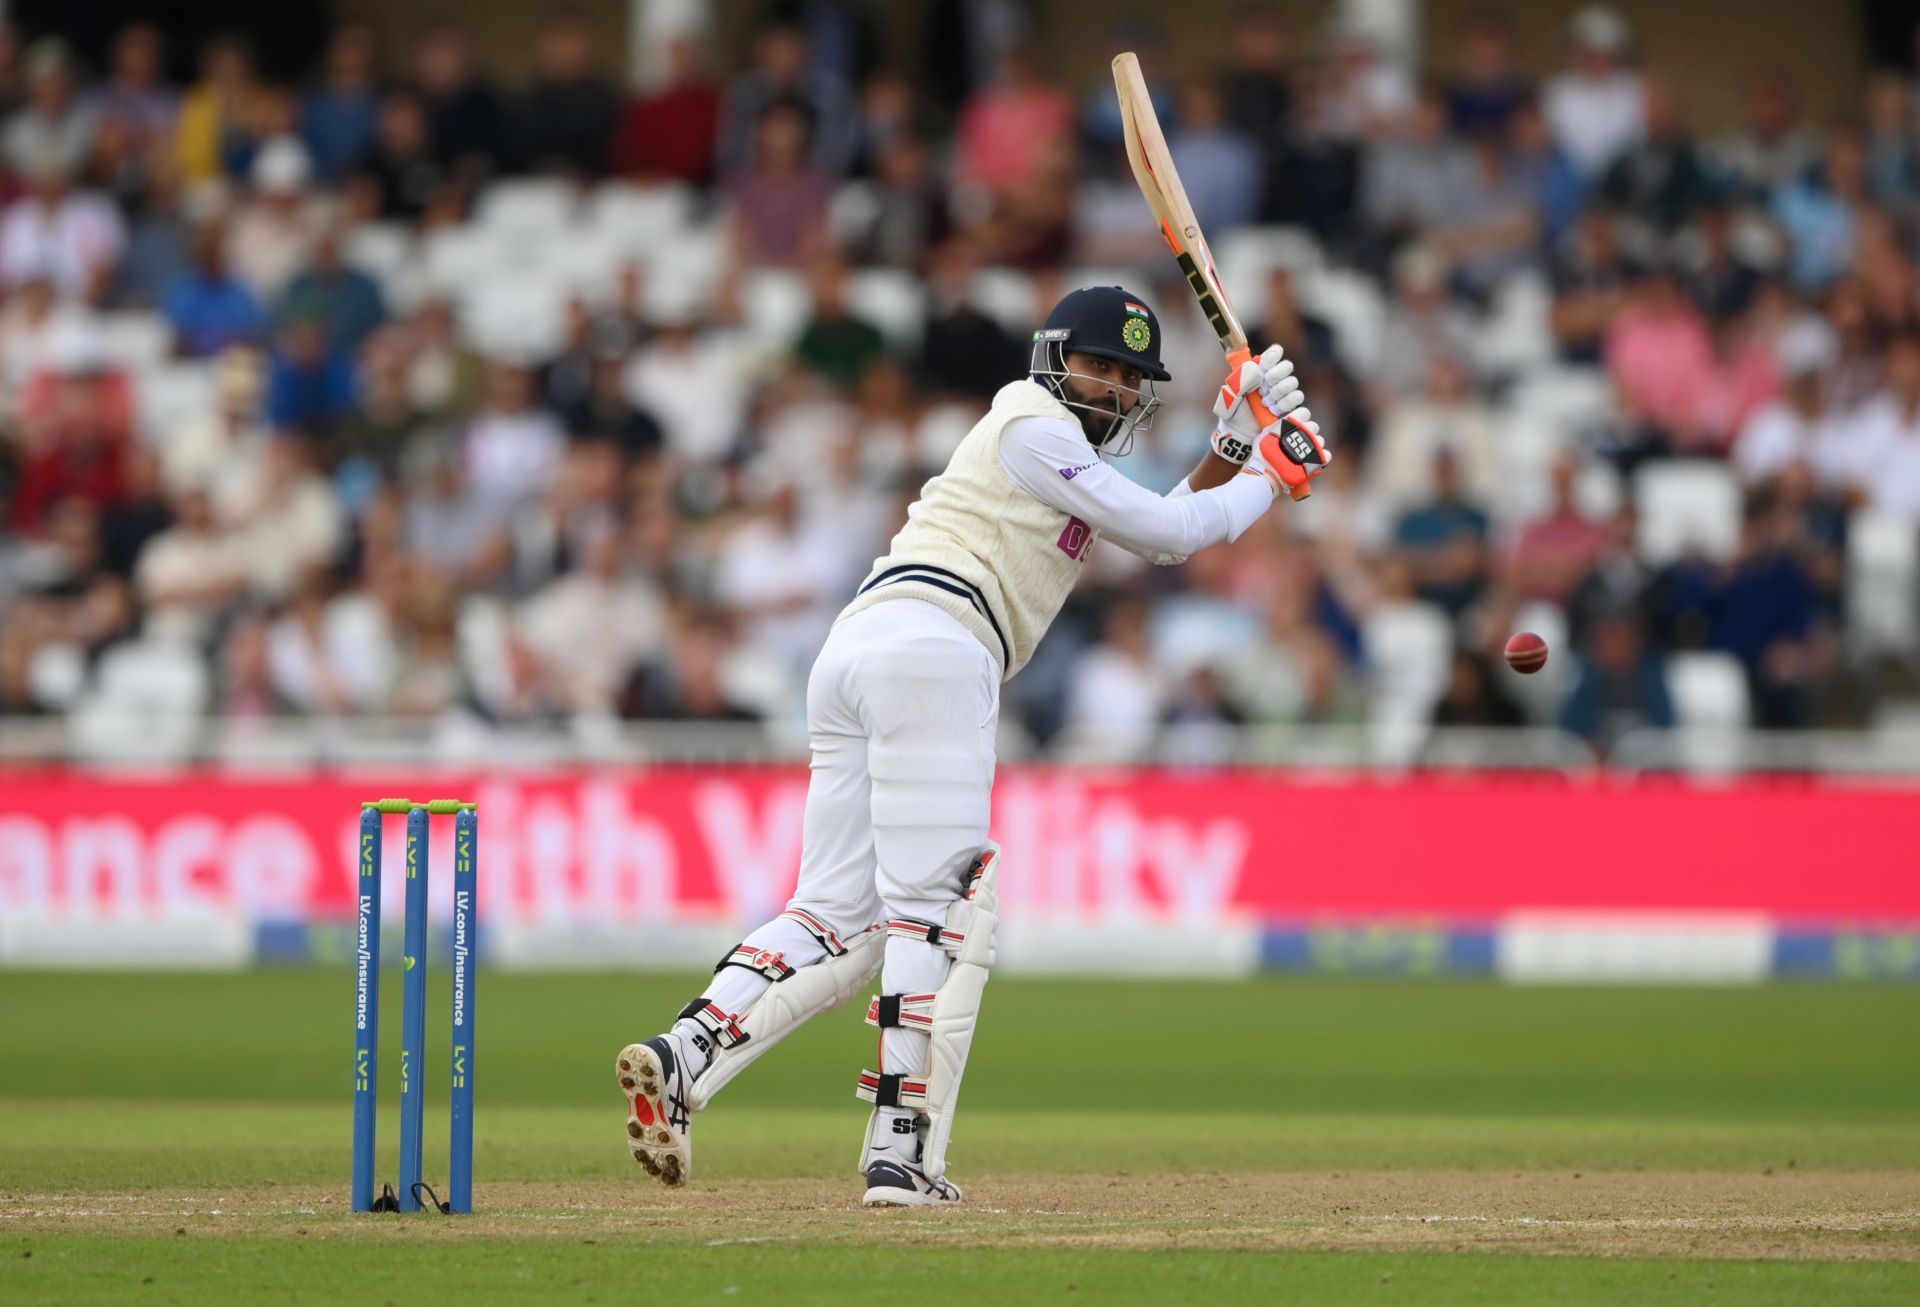 Ravindra Jadeja has made handsome contributions with the bat away from home